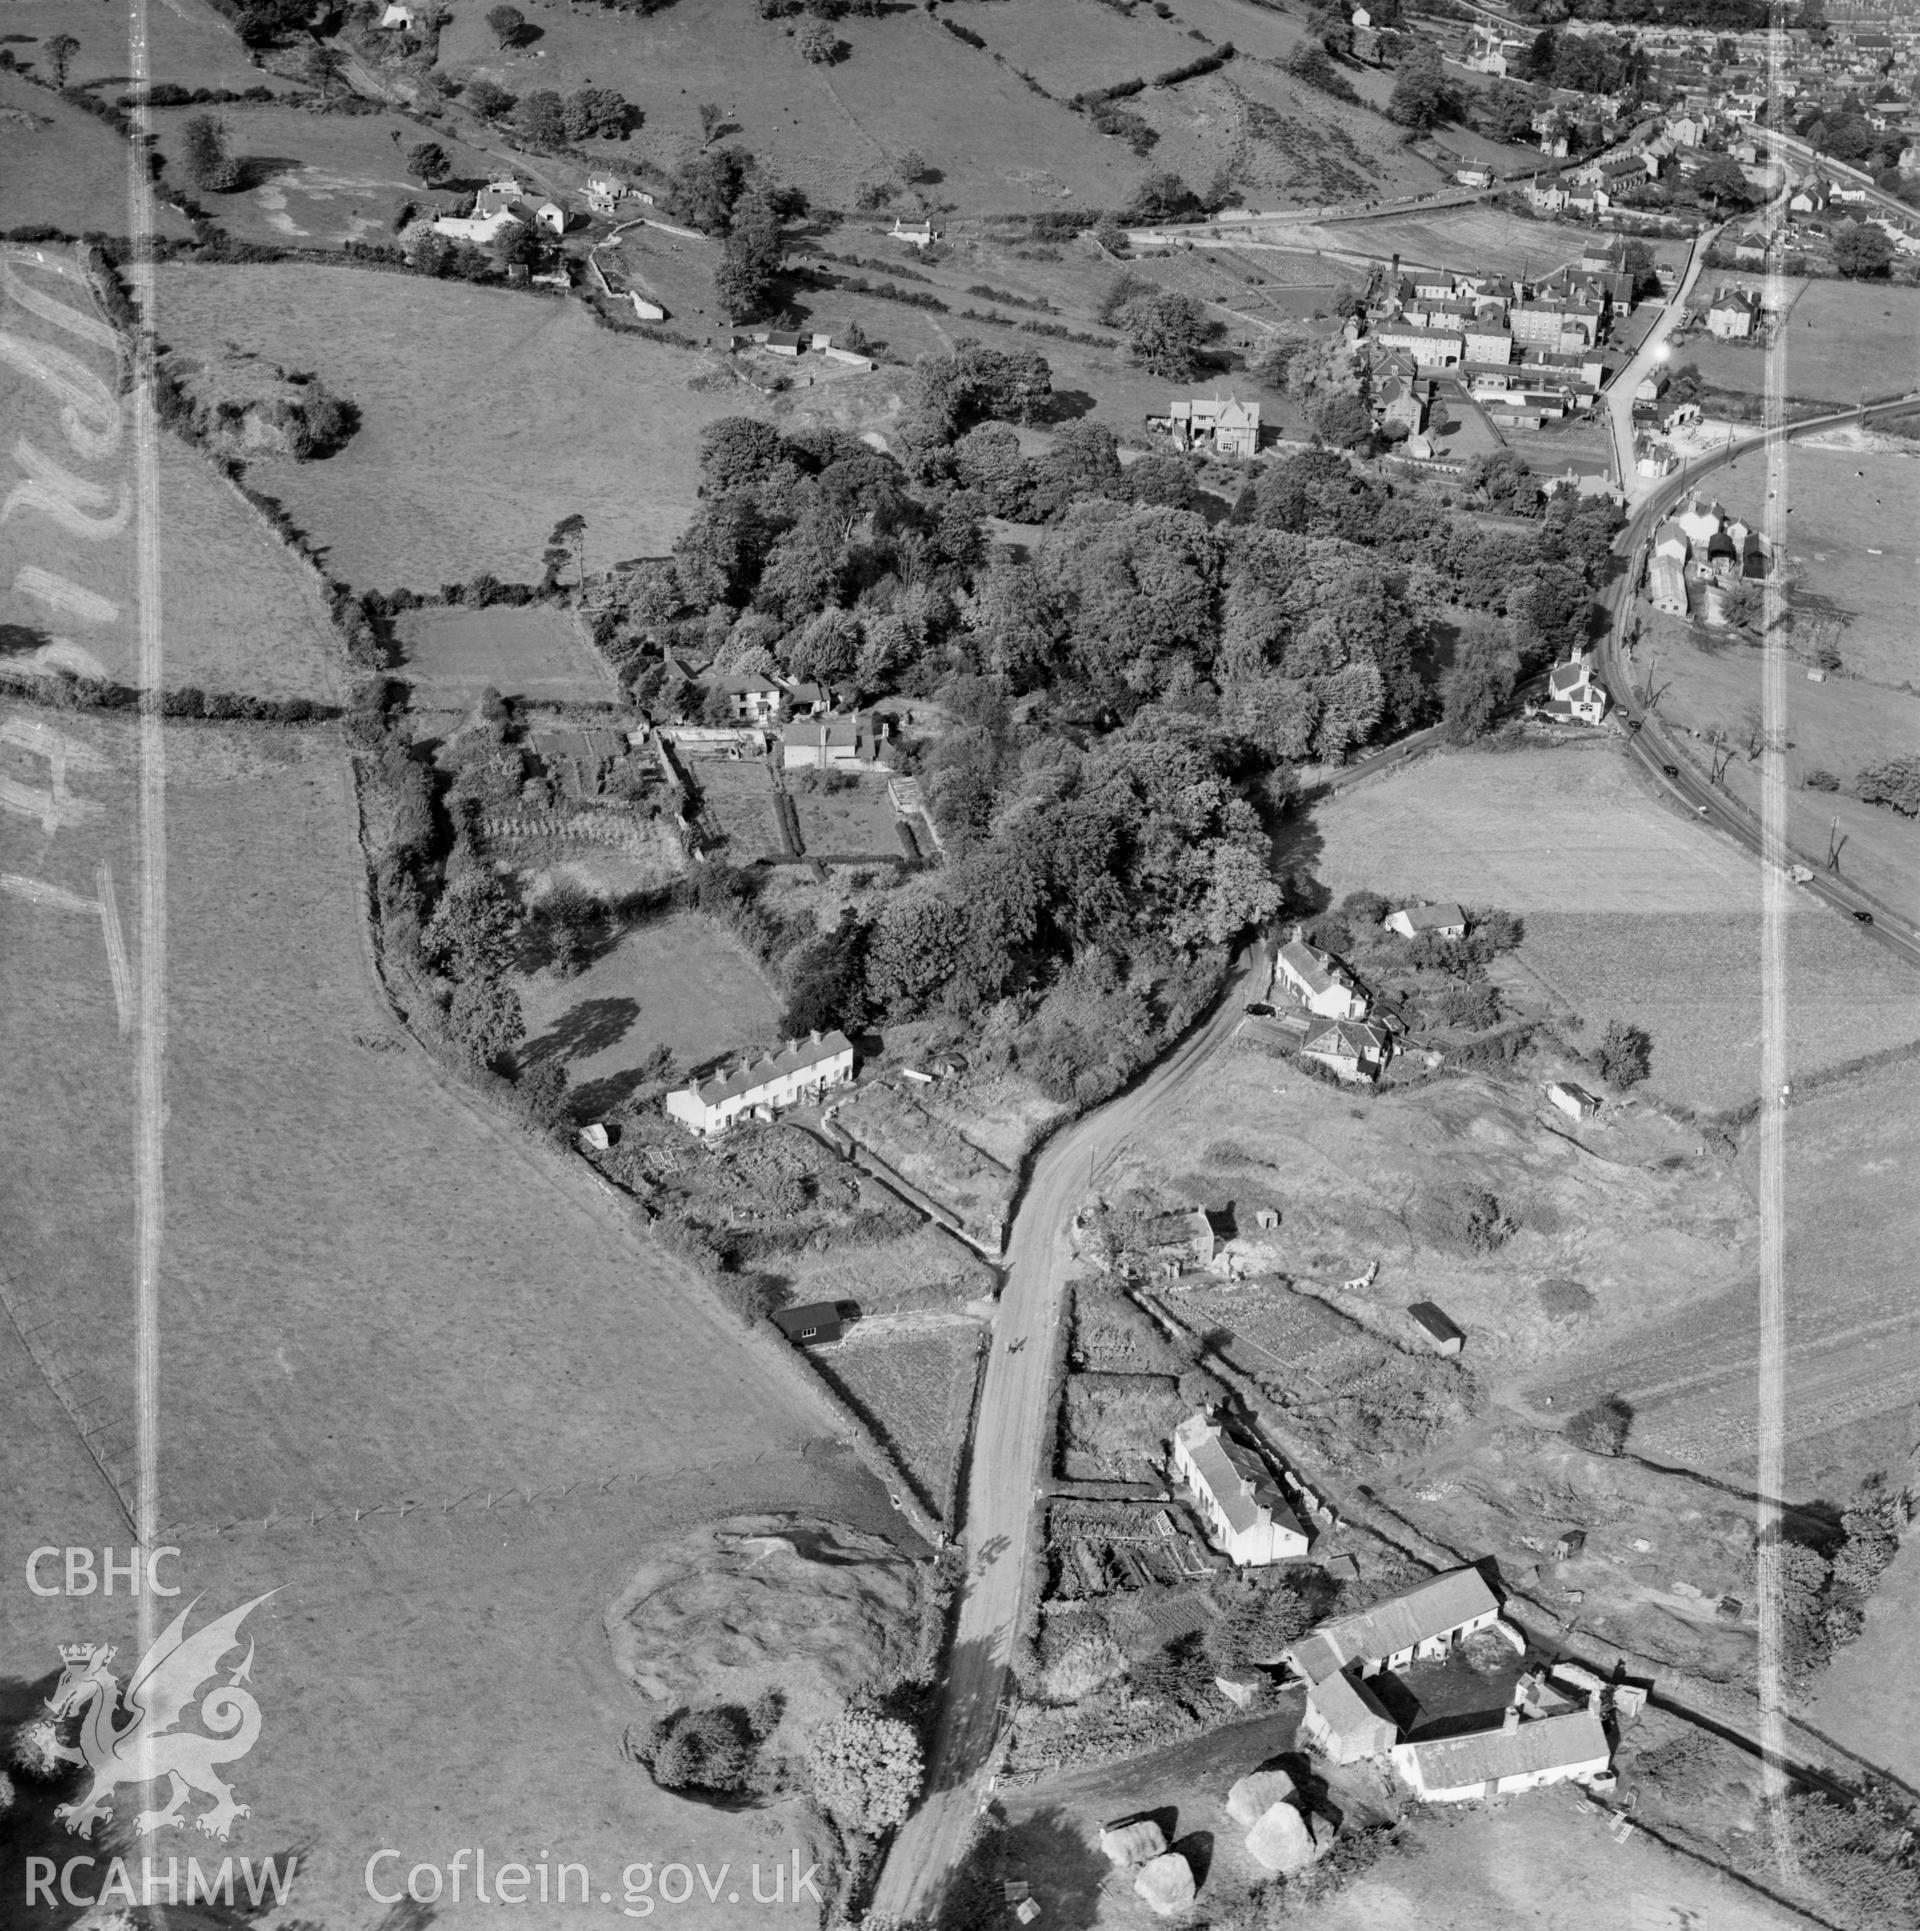 View of area south of Holywell showing Milwr farm in the foreground. Labelled "Holywell Textile Mills Ltd., Highfield & Pistyll".